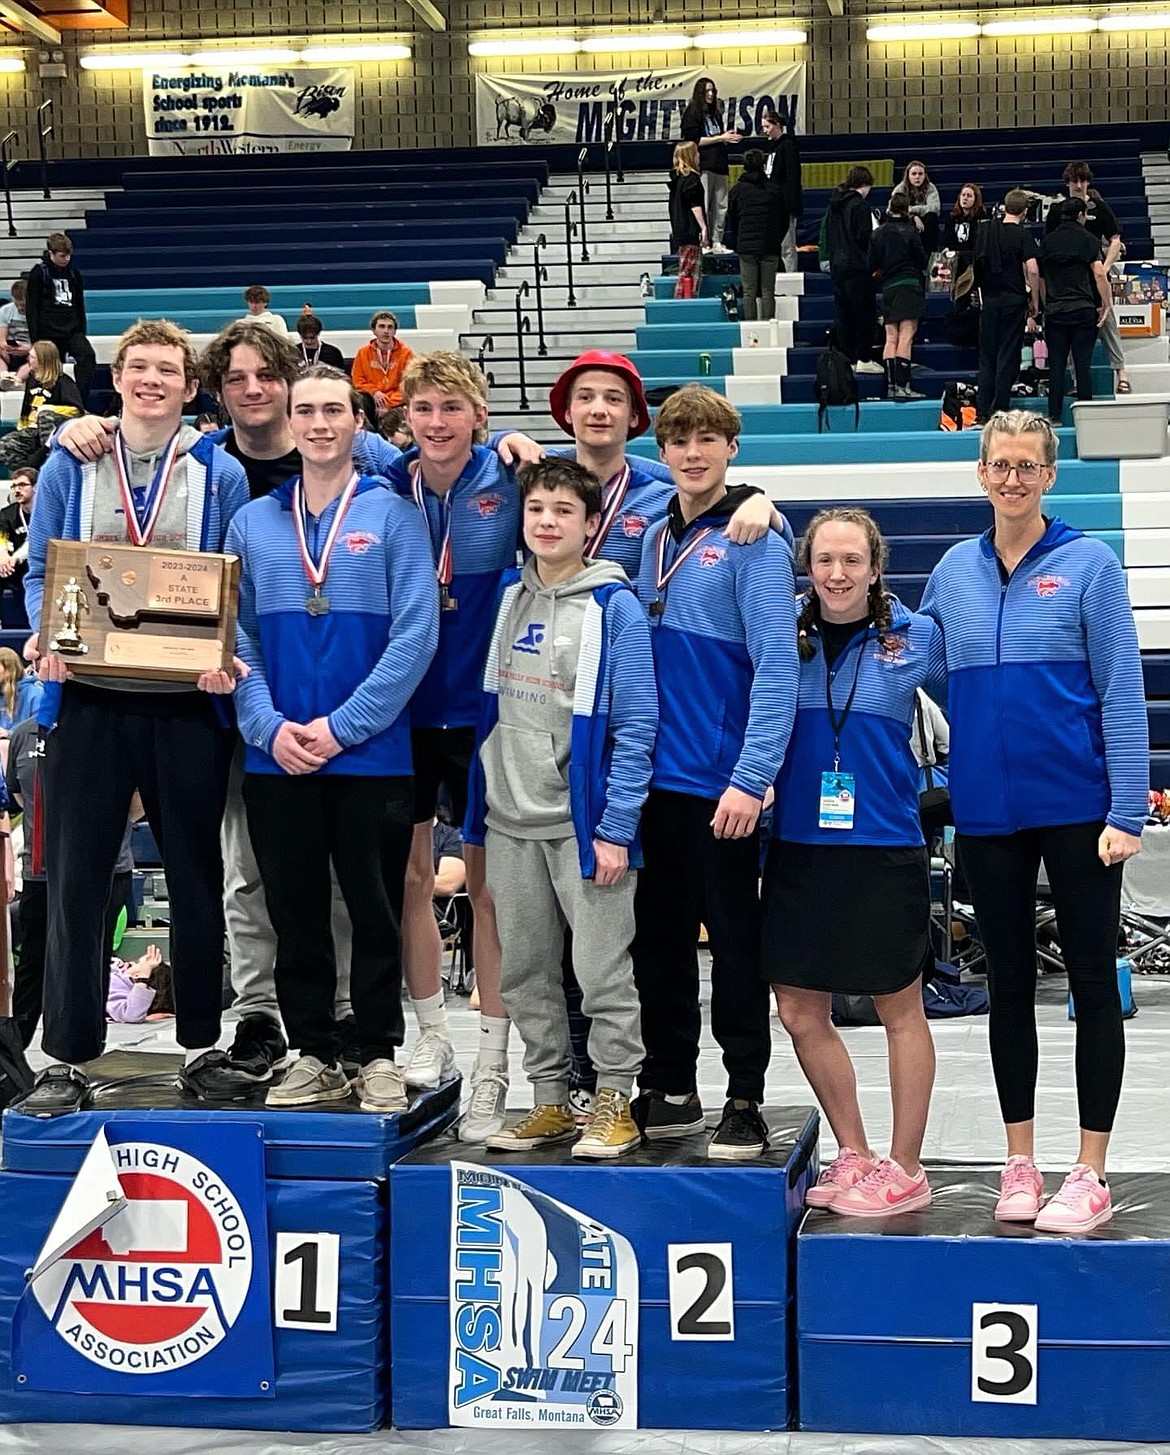 Left to right; Connor Keith, Zackary Pierce, Thane Borgen, Quinn Clark, Teagan Bates, Jackson Schubert, Tristan Victor, Head Coach Amy Caudill and Assistant Coach, Aven Middlesworth at the state tournament this weekend. (Courtesy photo)